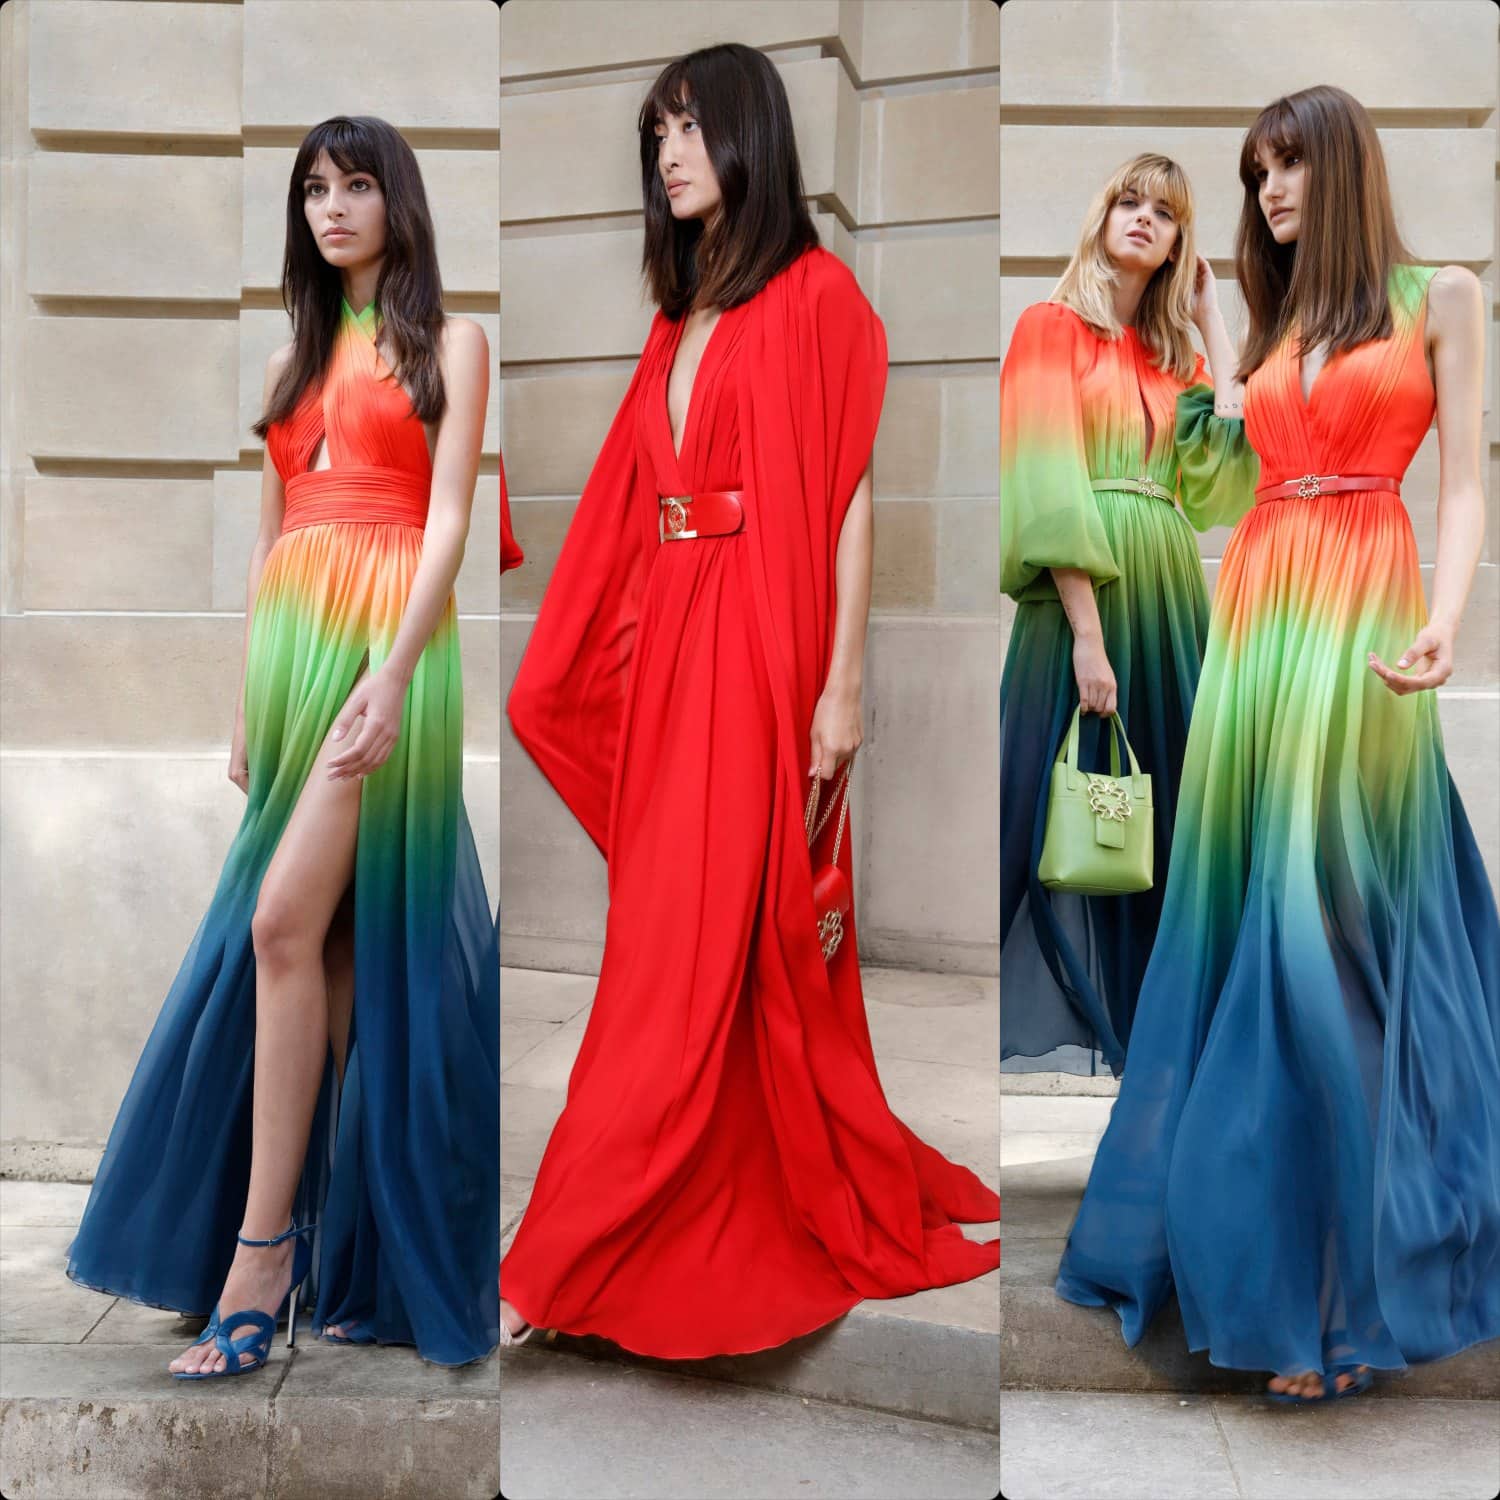 Elie Saab Spring Summer 2022 Ready-to-Wear. RUNWAY MAGAZINE ® Collections. RUNWAY NOW / RUNWAY NEW